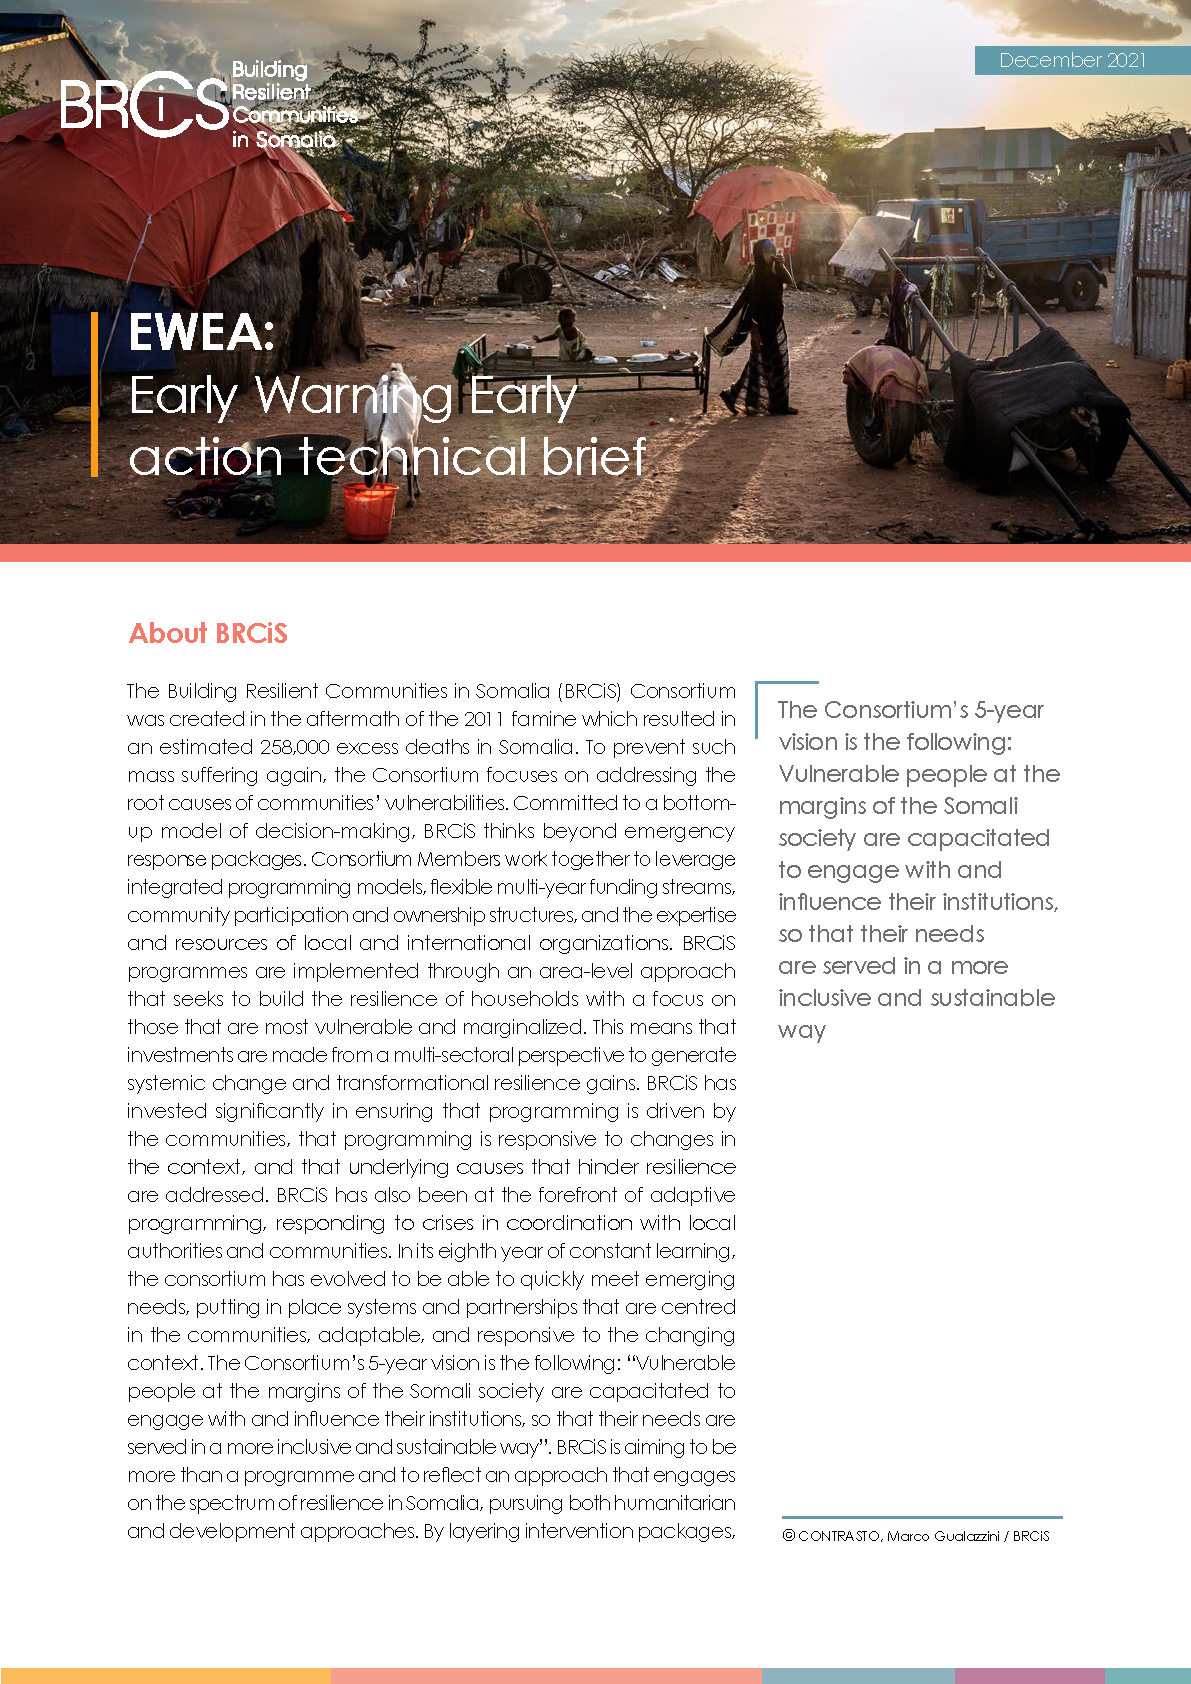 Cover page for Early Warning for Early Action Technical Brief